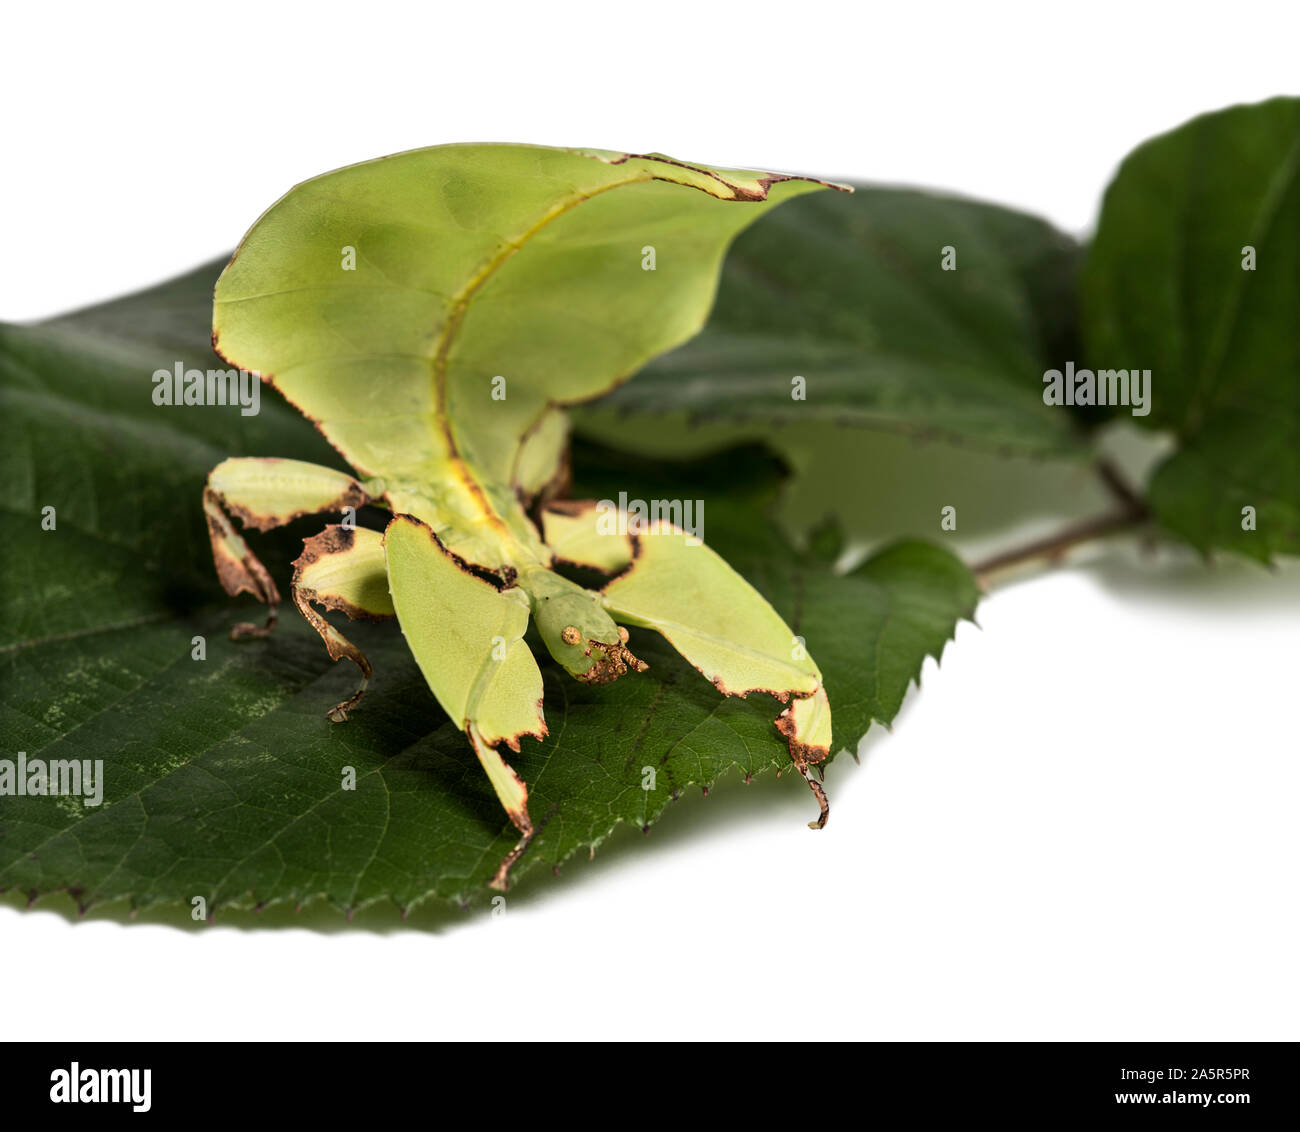 Leaf insect, Phyllium giganteum, on leaf in front of white background Stock Photo